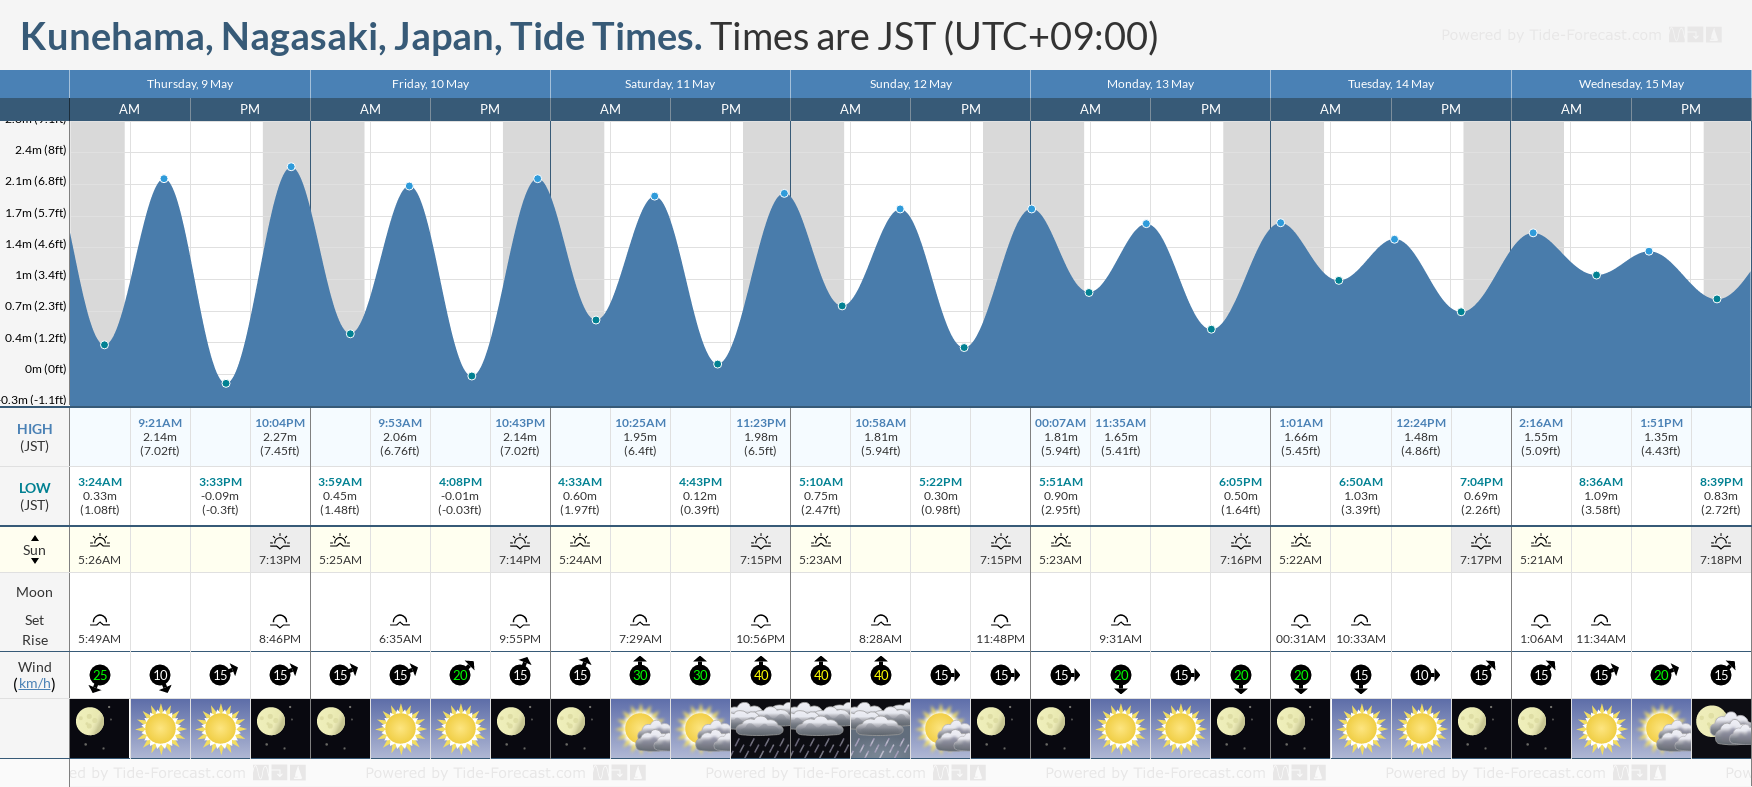 Kunehama, Nagasaki, Japan Tide Chart including high and low tide tide times for the next 7 days